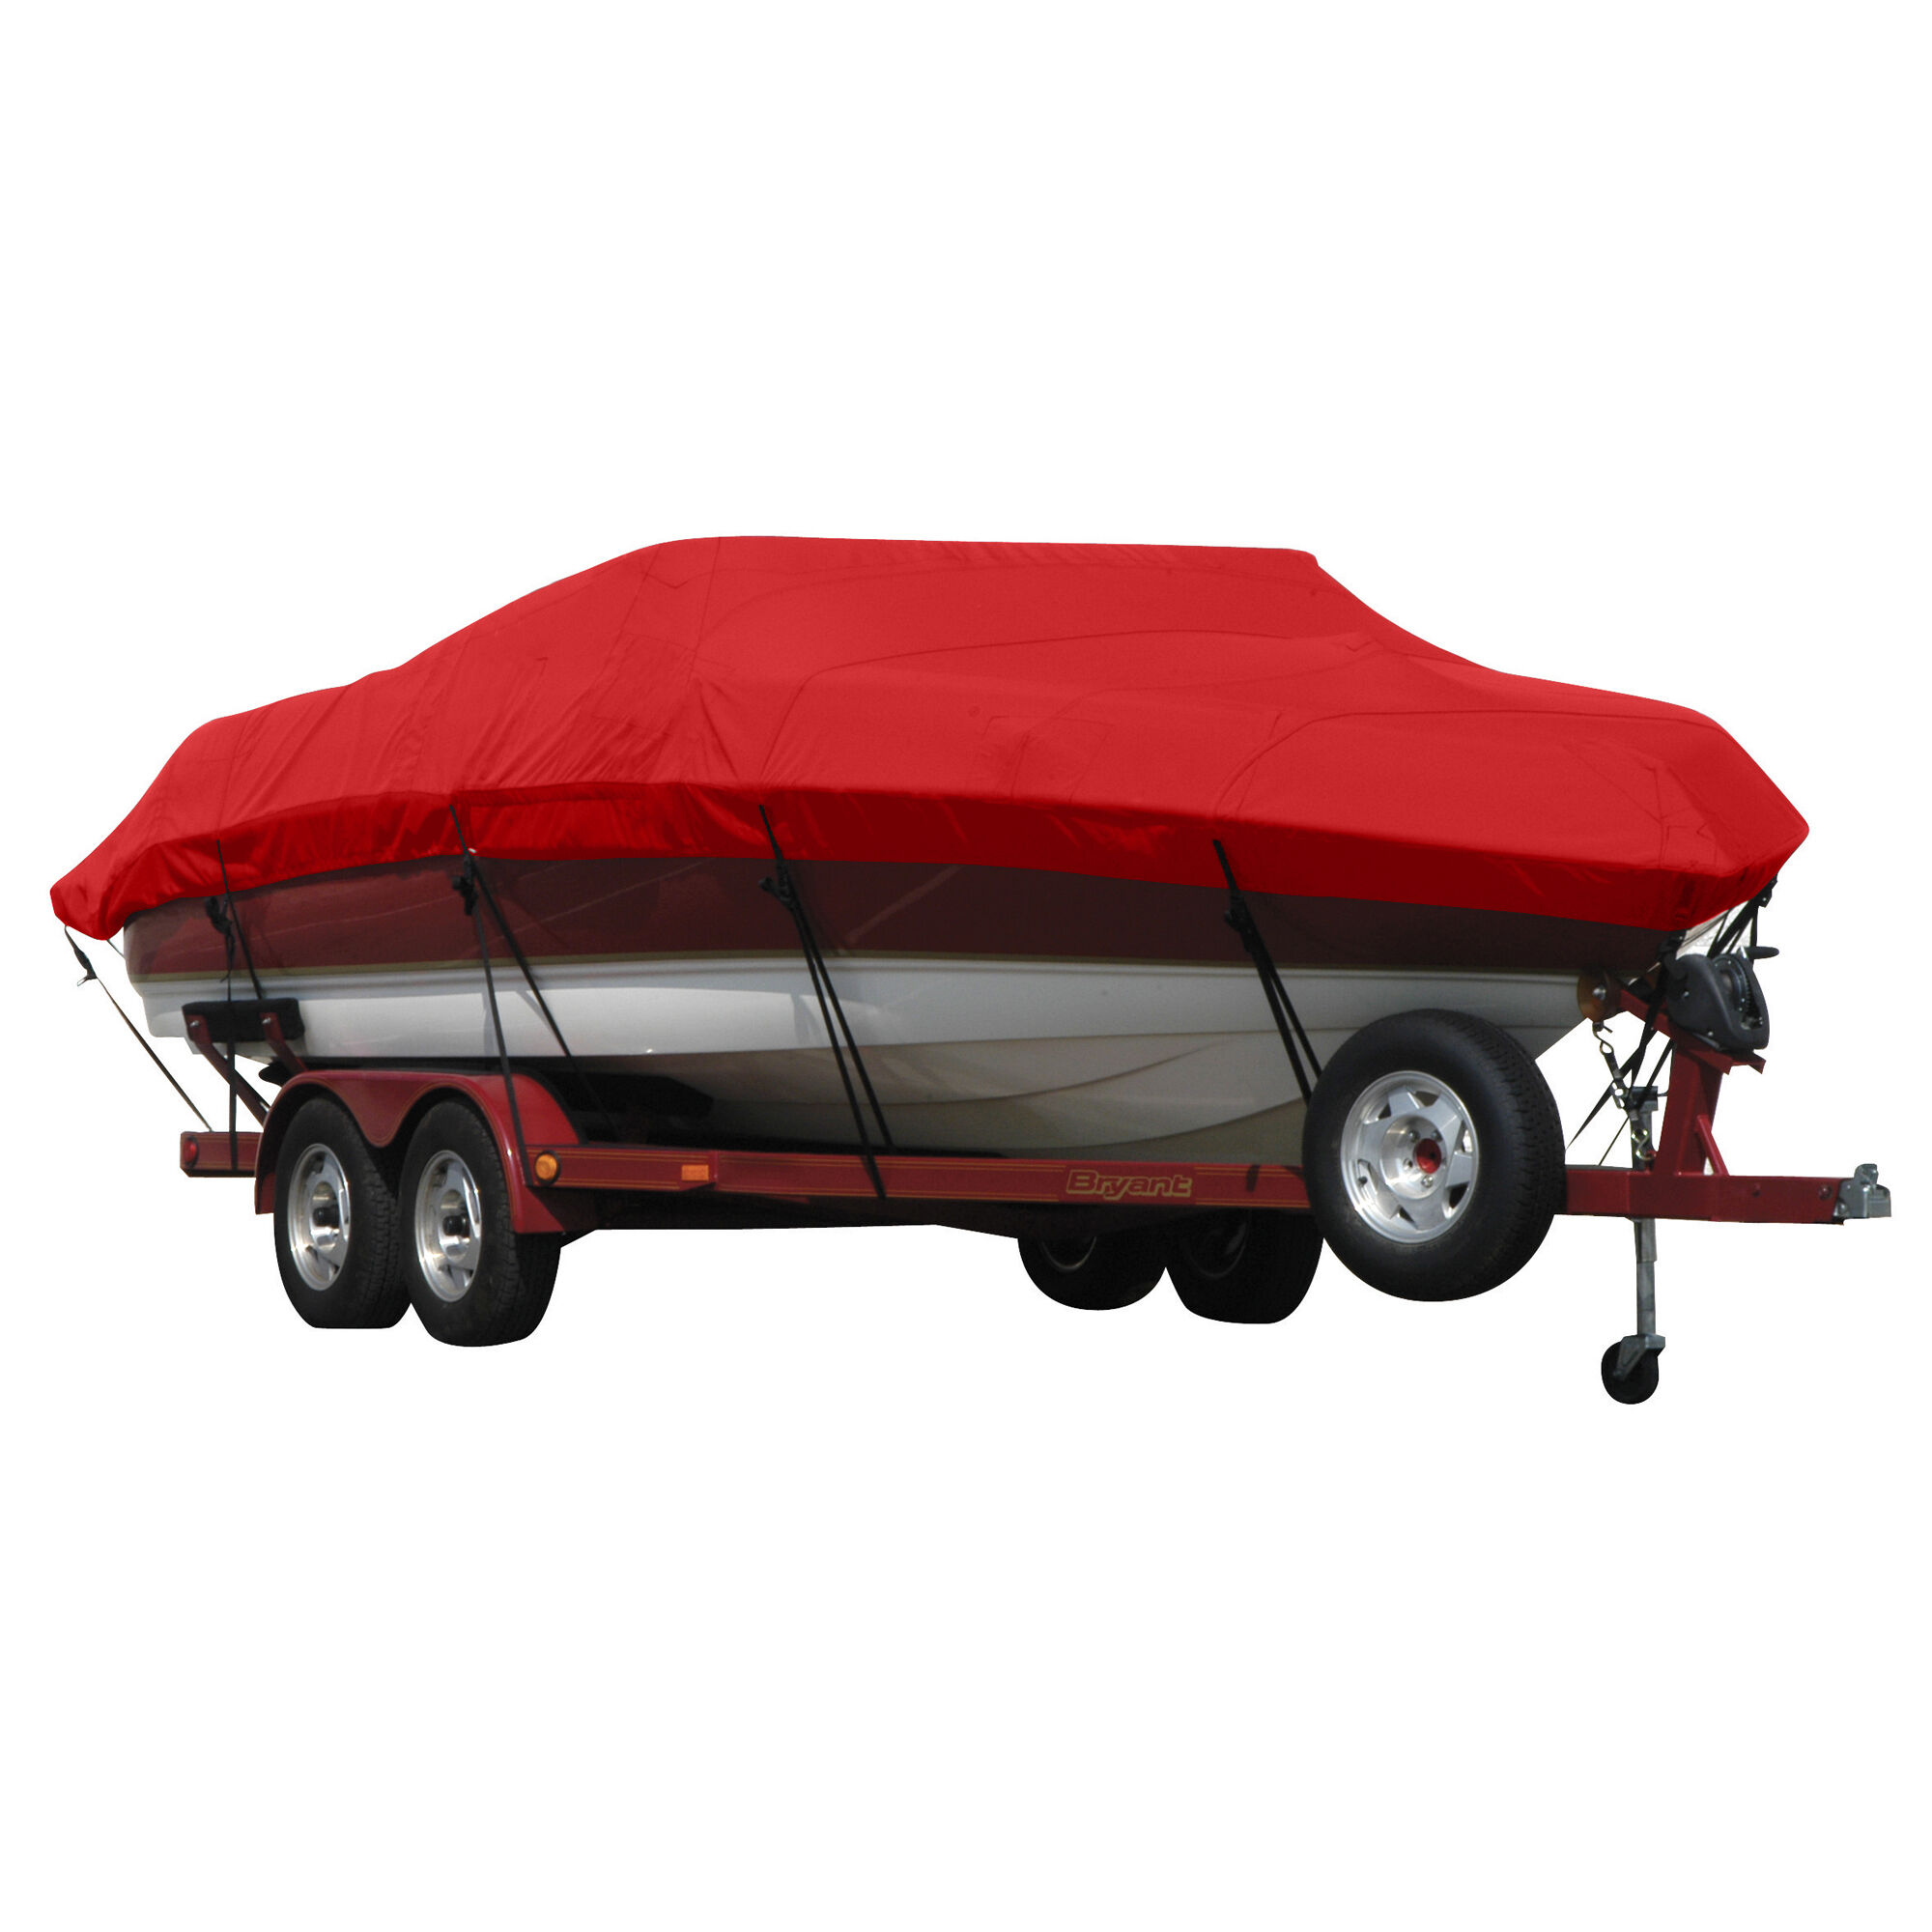 Covermate Exact Fit Sunbrella Boat Cover for Bayliner Classic 2452 Cd Classic 2452 Cd Hard Top I/O. Jockey Red Acrylic